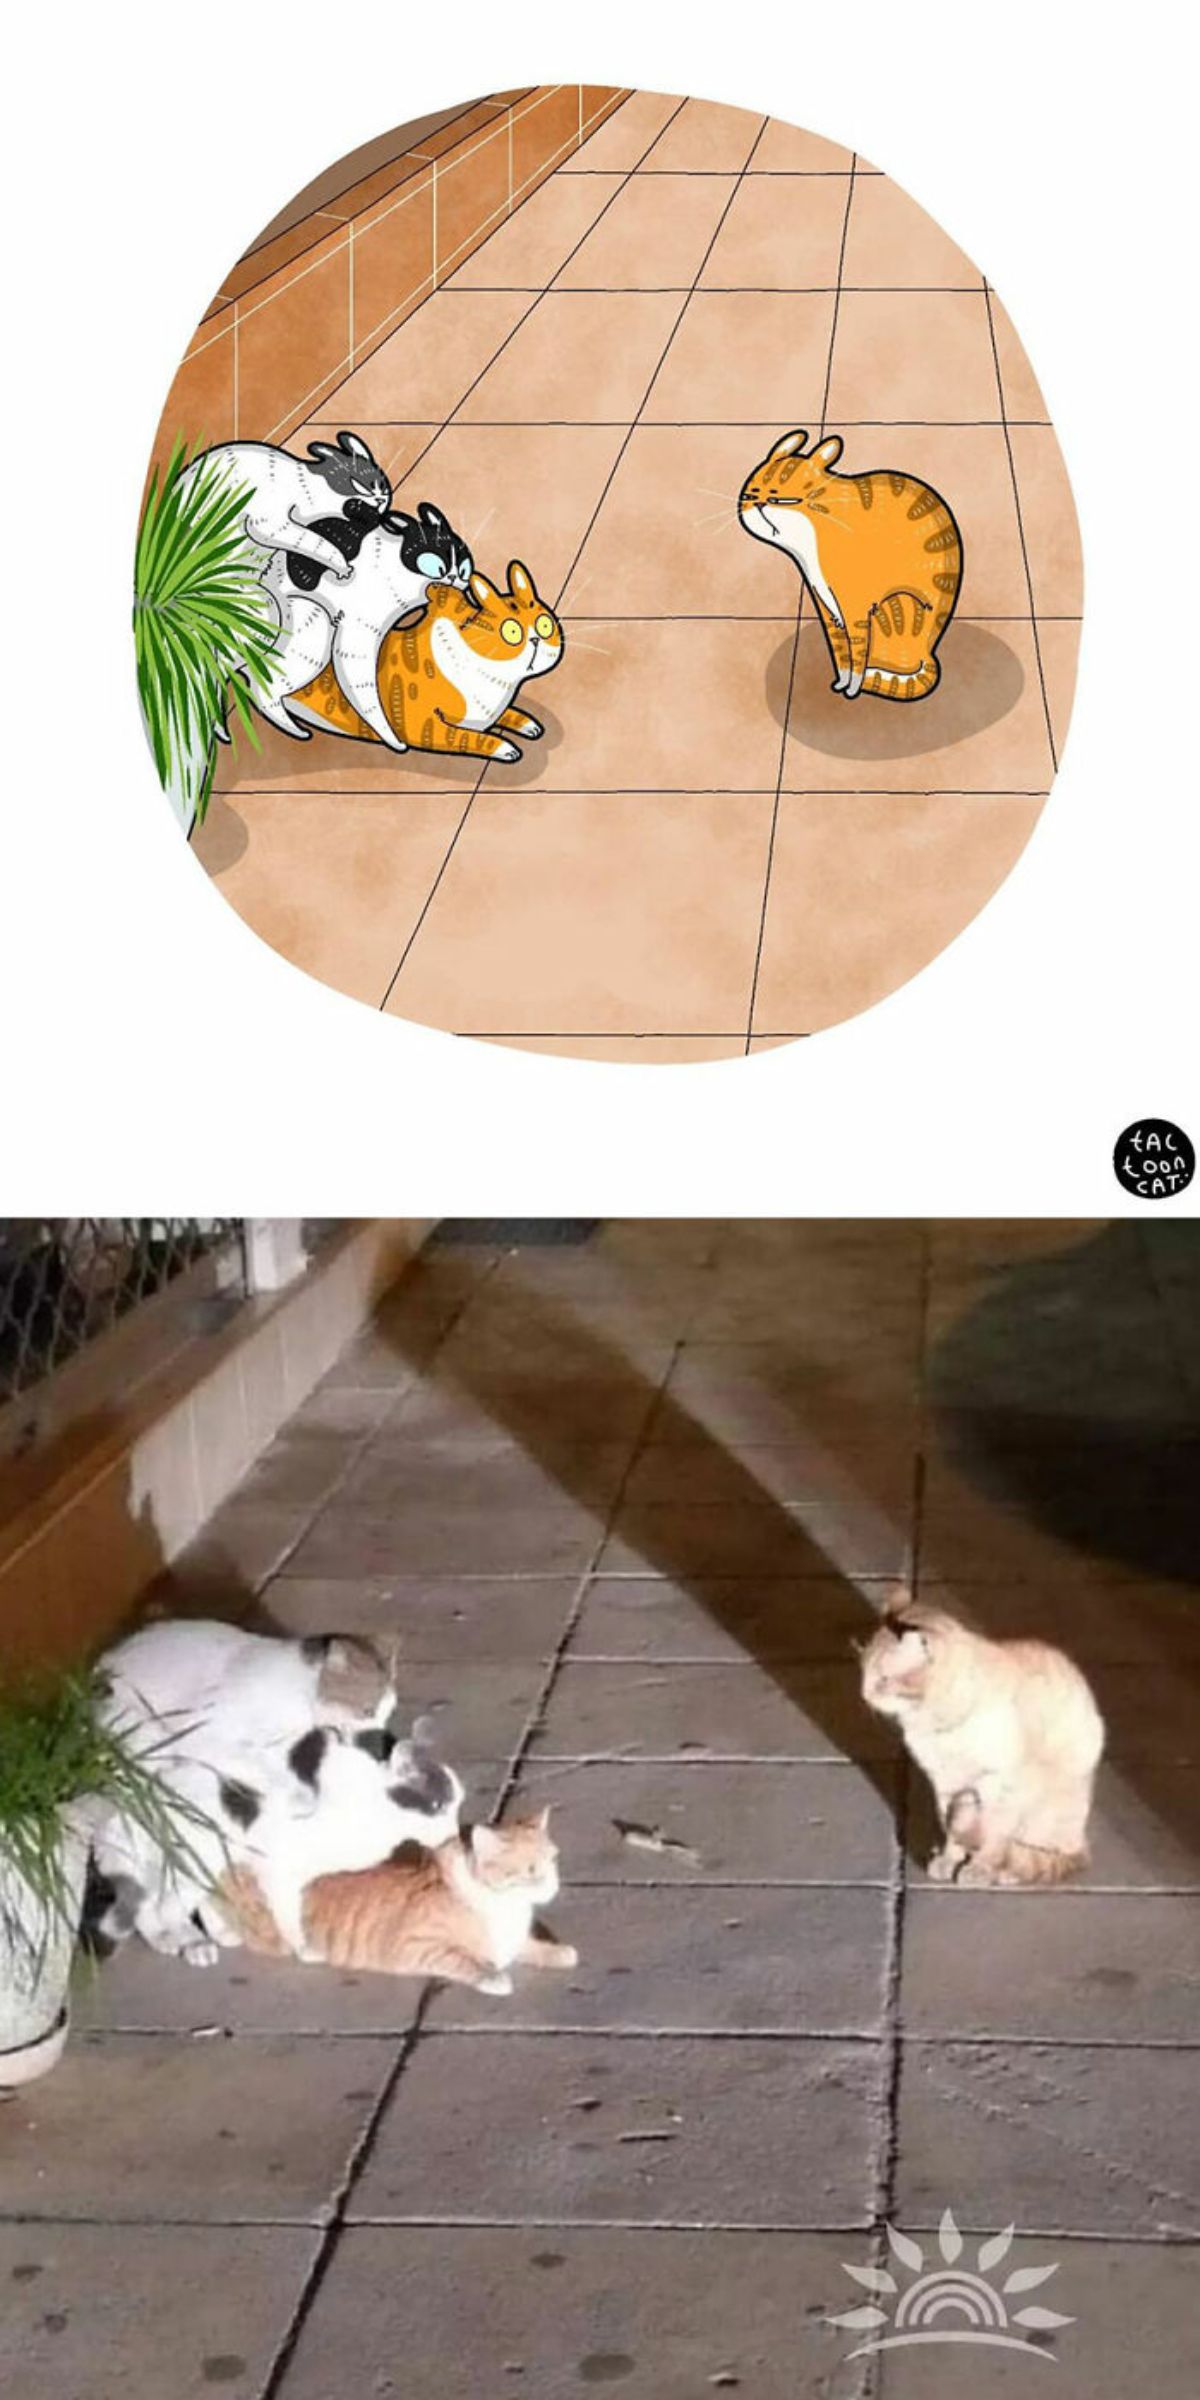 cartoon photo and real photo of an orange and white cat with a black and white cat on it and a grey and white tabby on top of it with an orange cat in front of the 3 cats